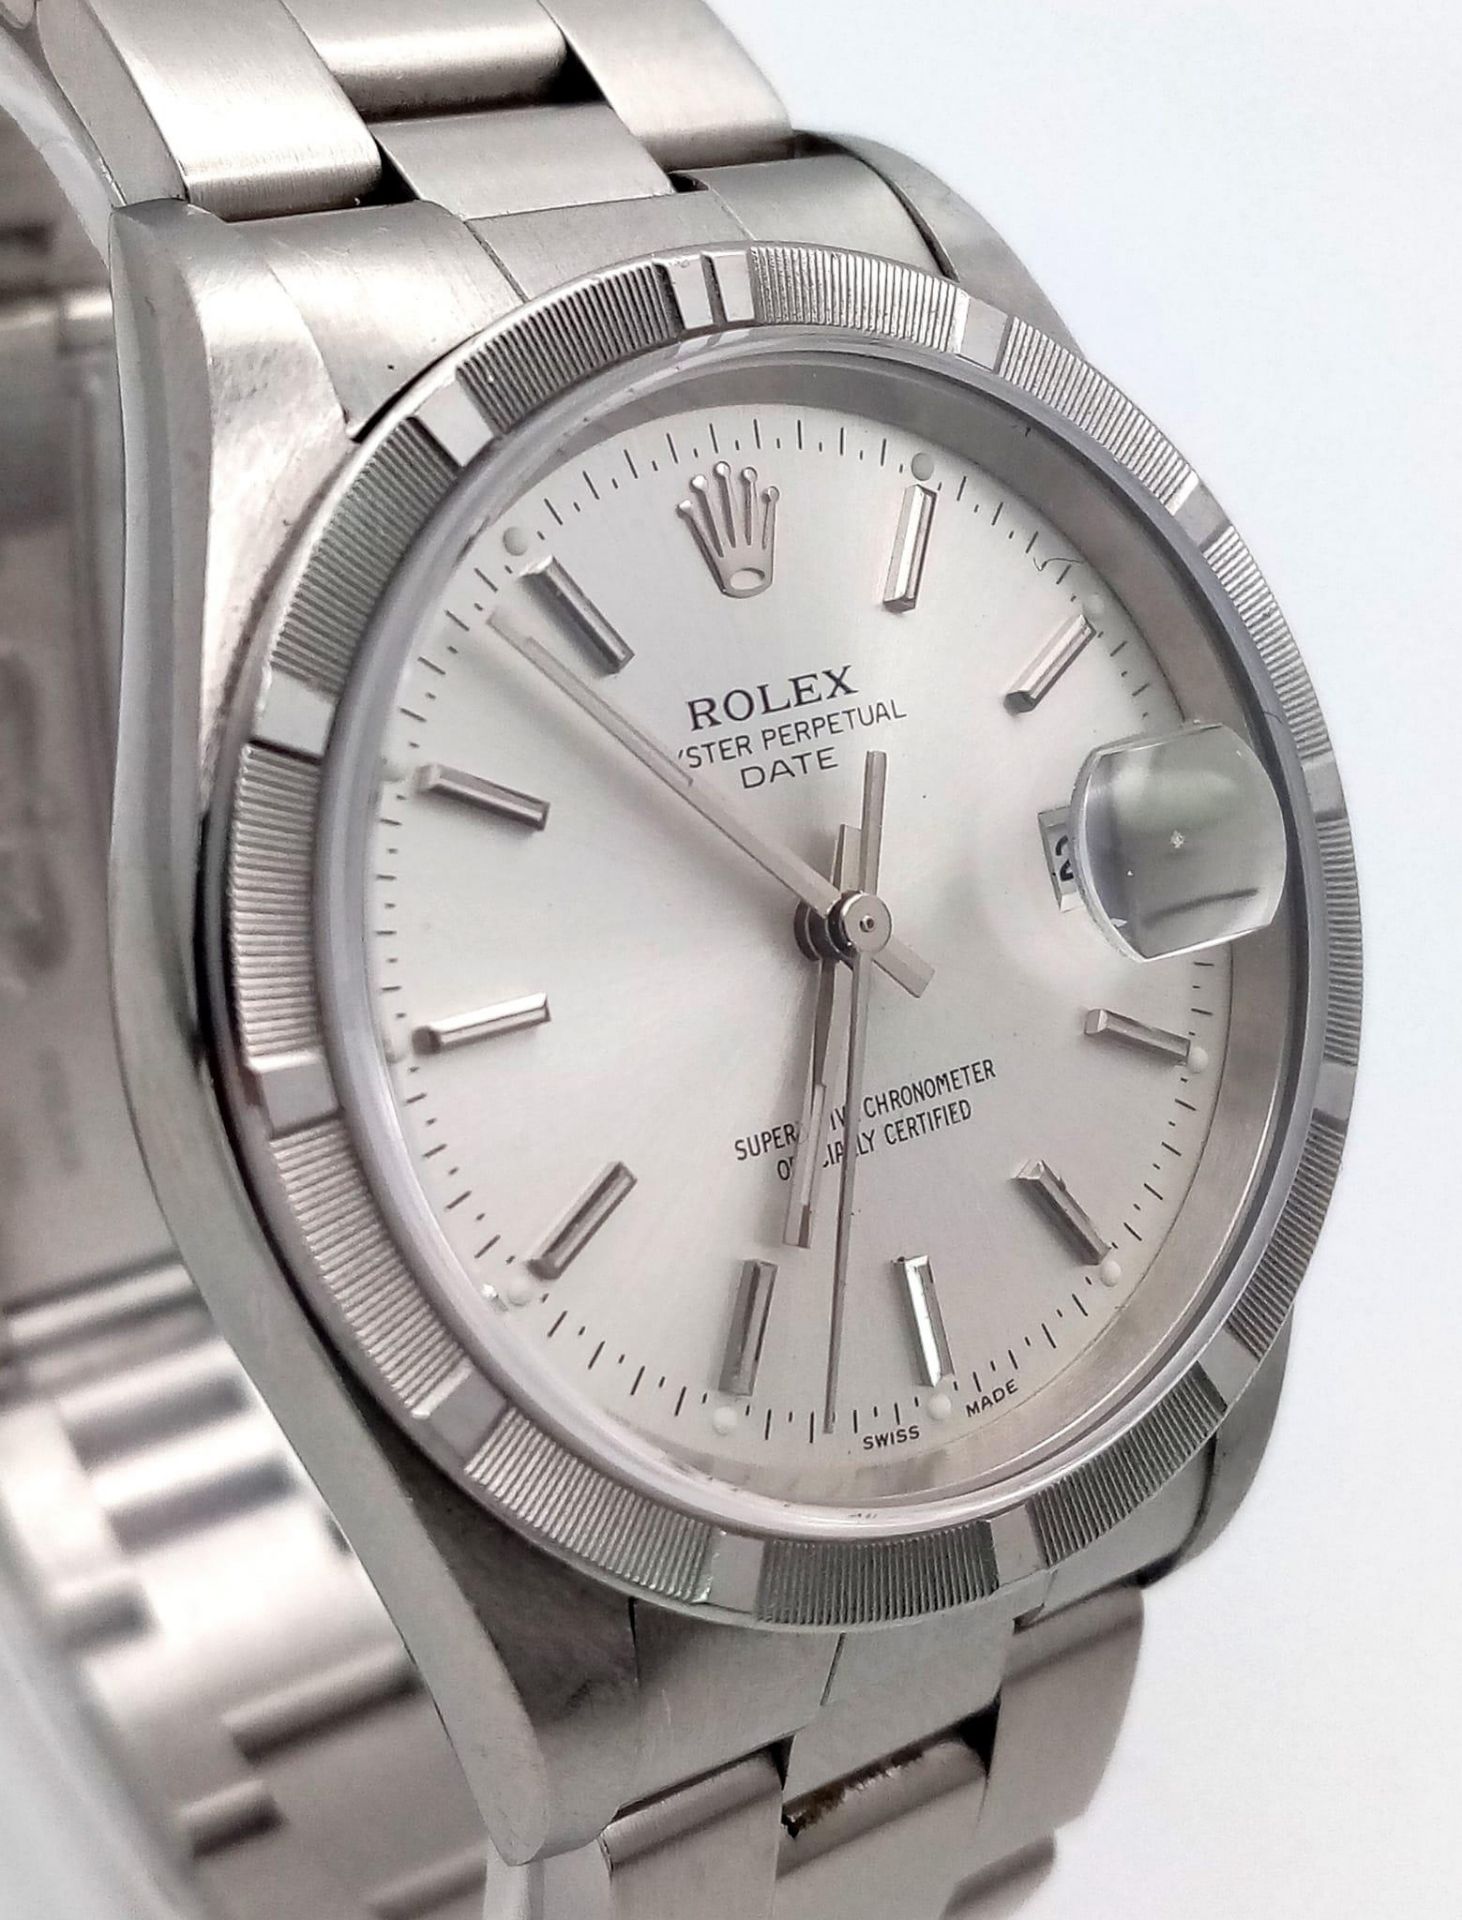 A Rolex Oyster Perpetual Datejust Gents Watch. Stainless steel bracelet and case - 35mm. Silver tone - Image 3 of 8